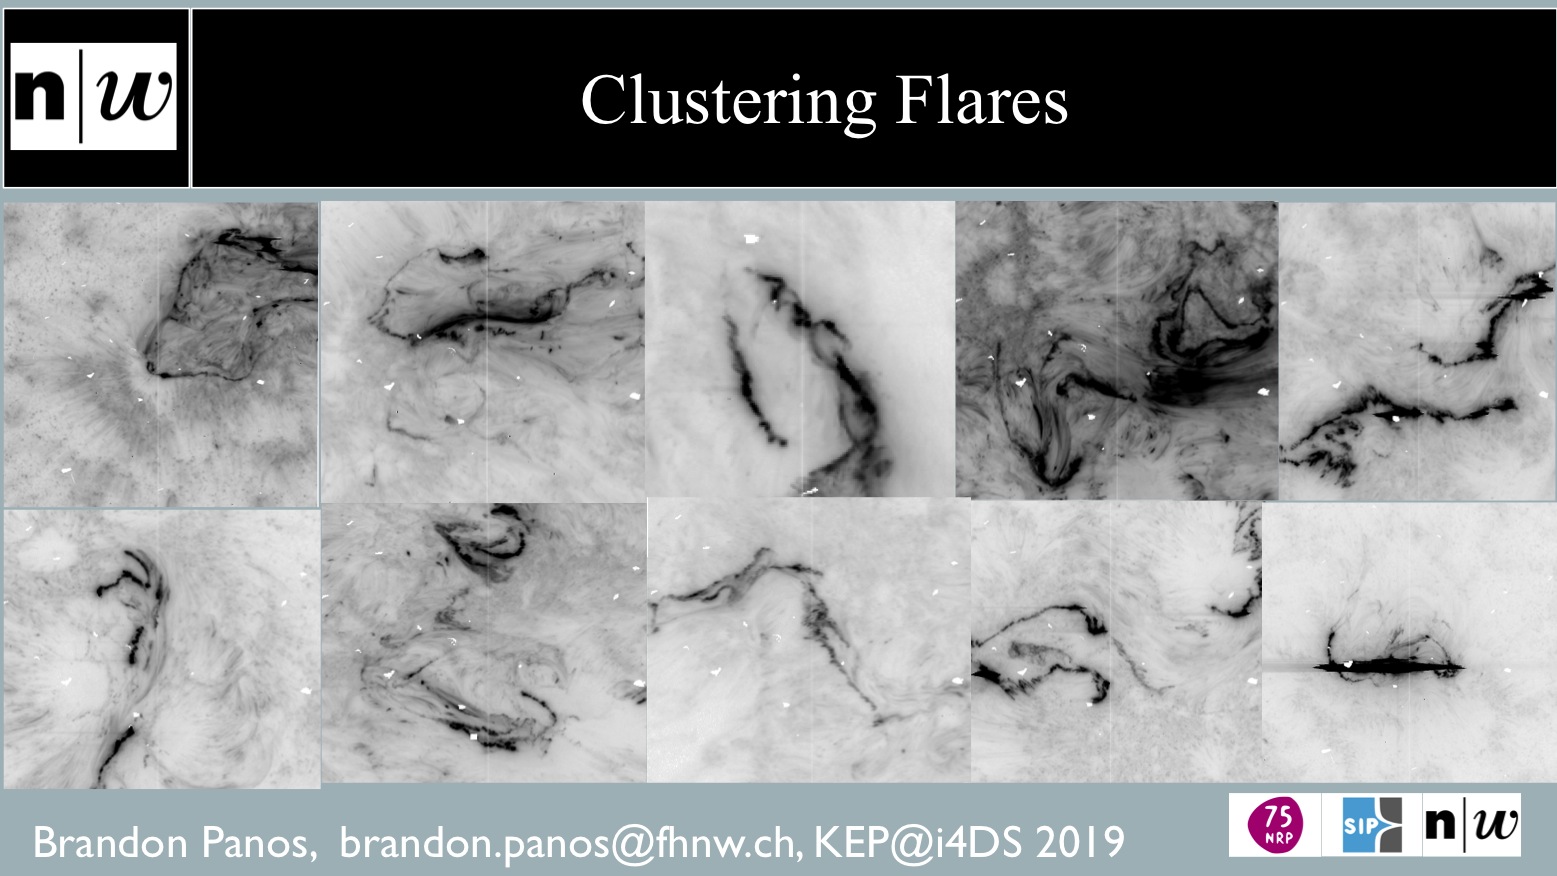 Clustering Flares, presentation about research for the NFP75 project IRIS Big Data by Brandon Panos, KEP@I4DS 2019